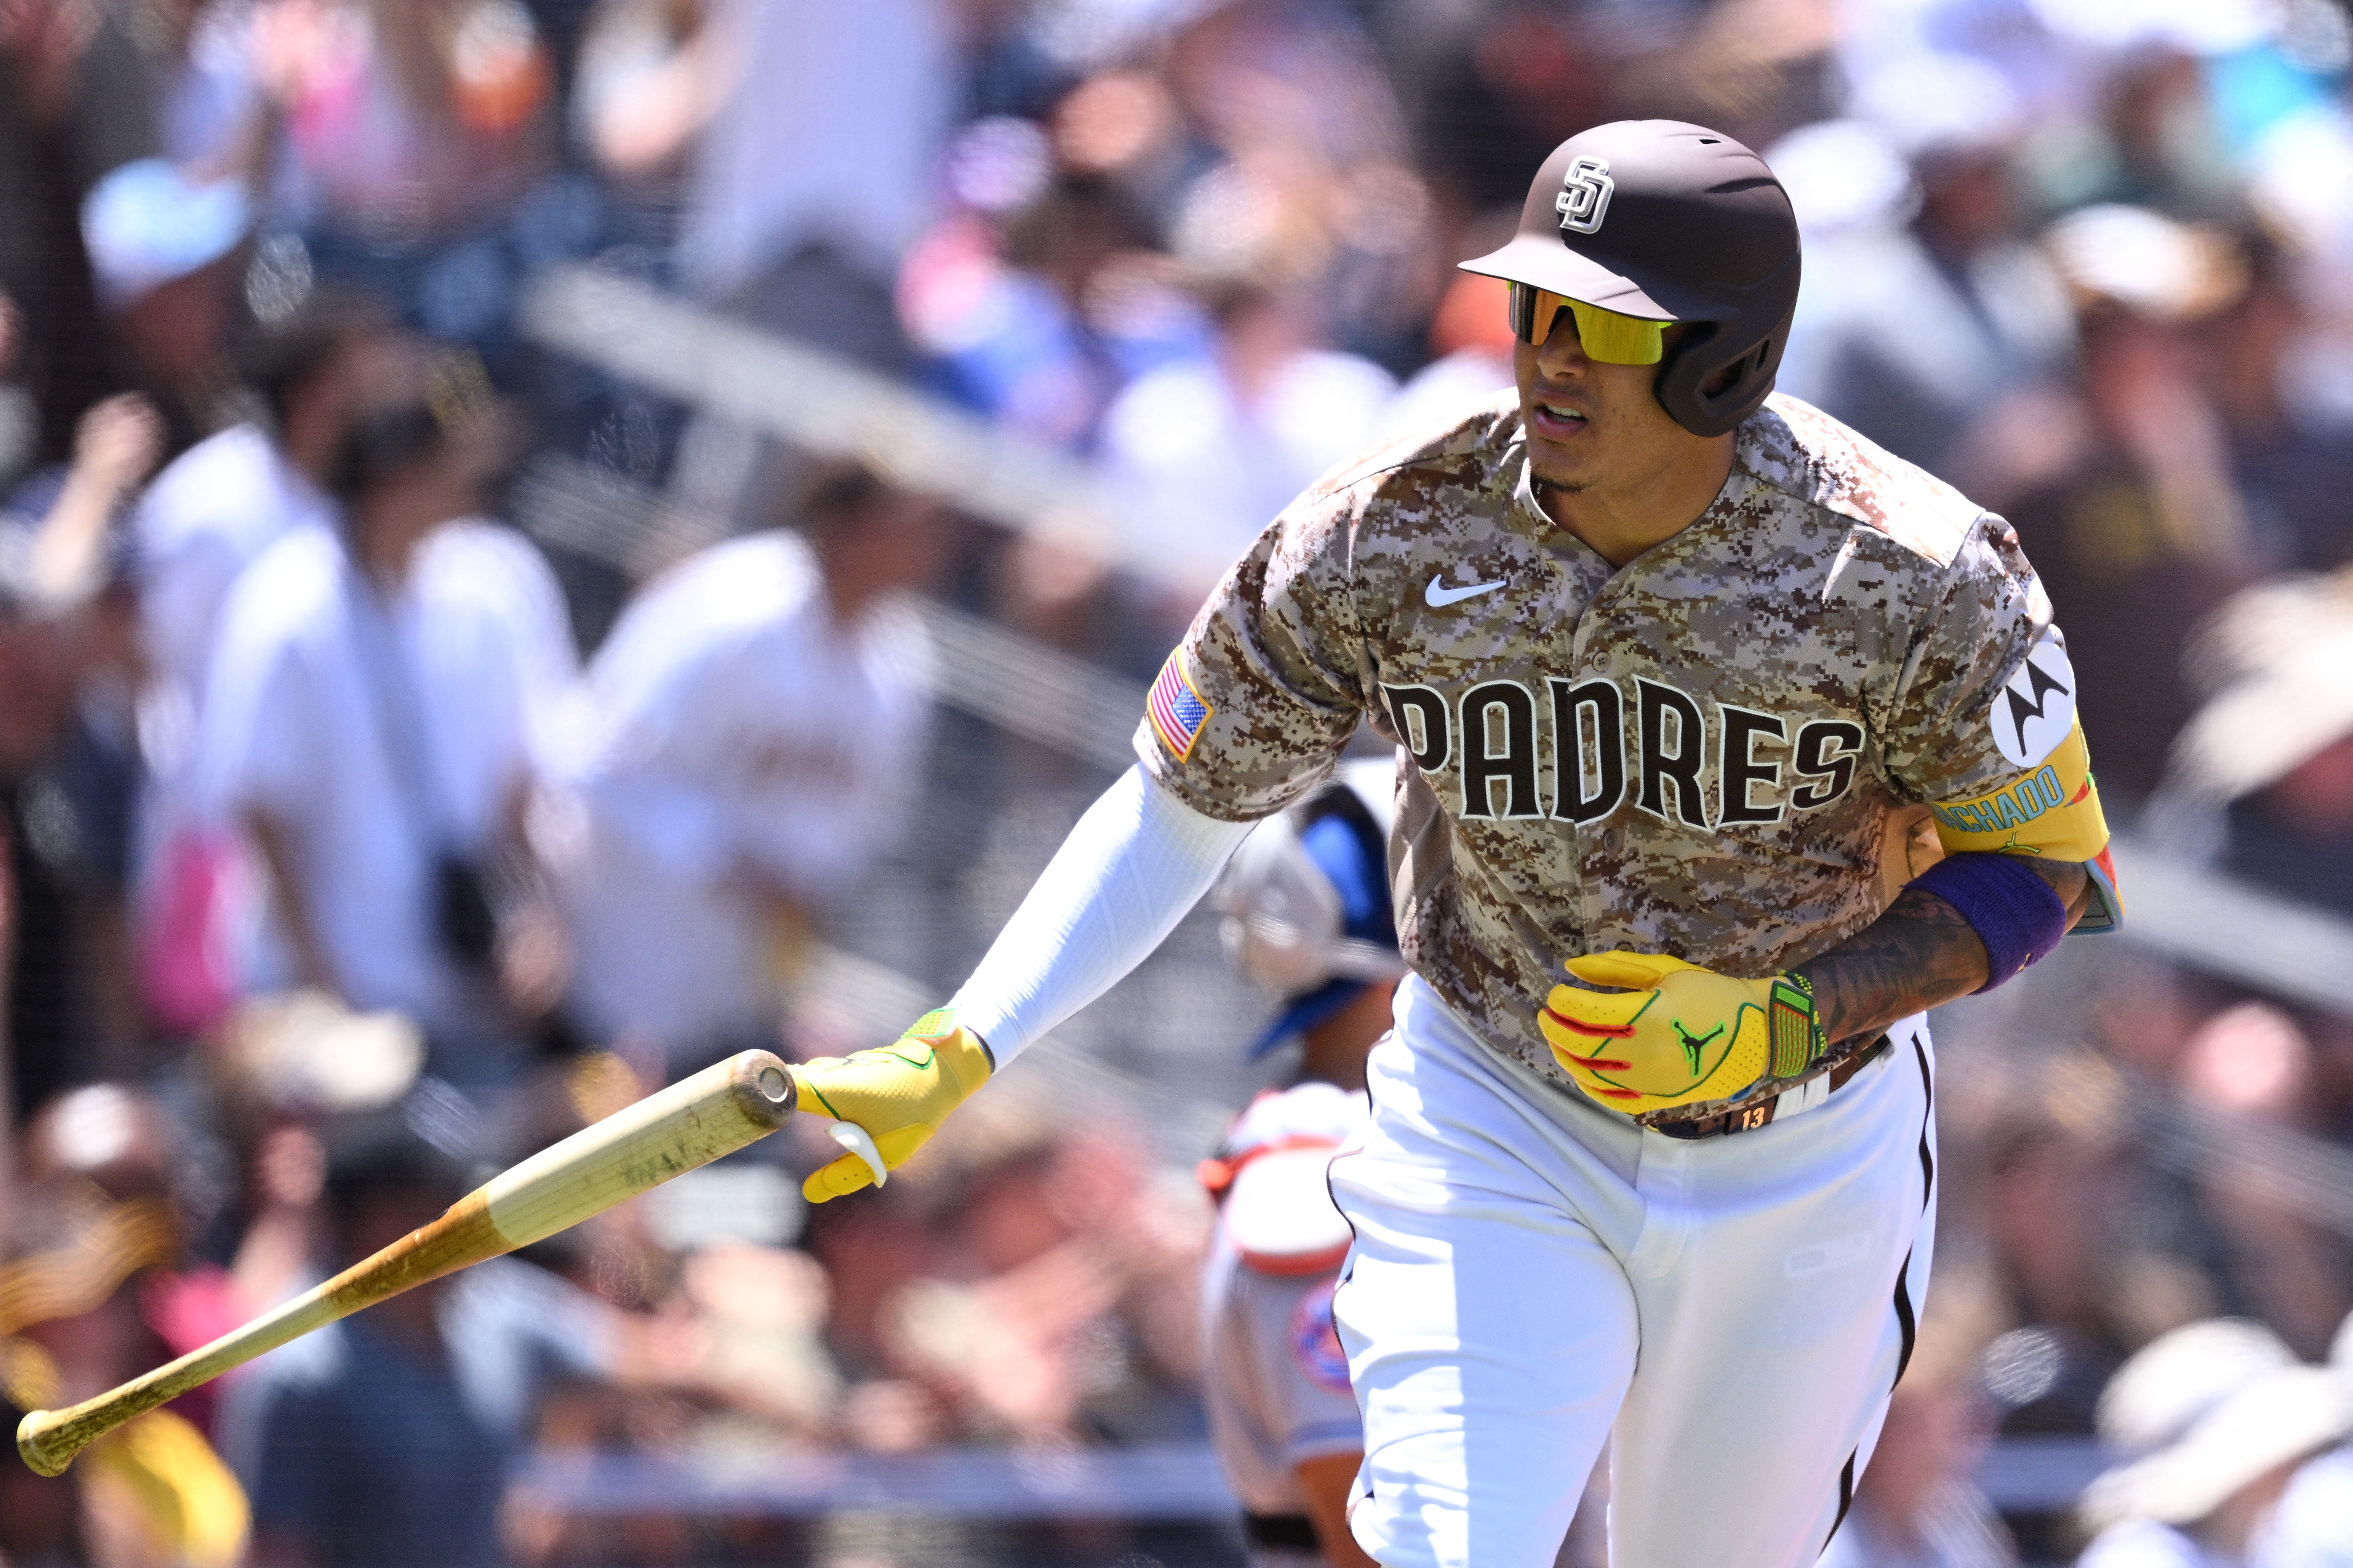 Manny Machado has 2 HRs, 5 RBIs to lead Padres past Mets